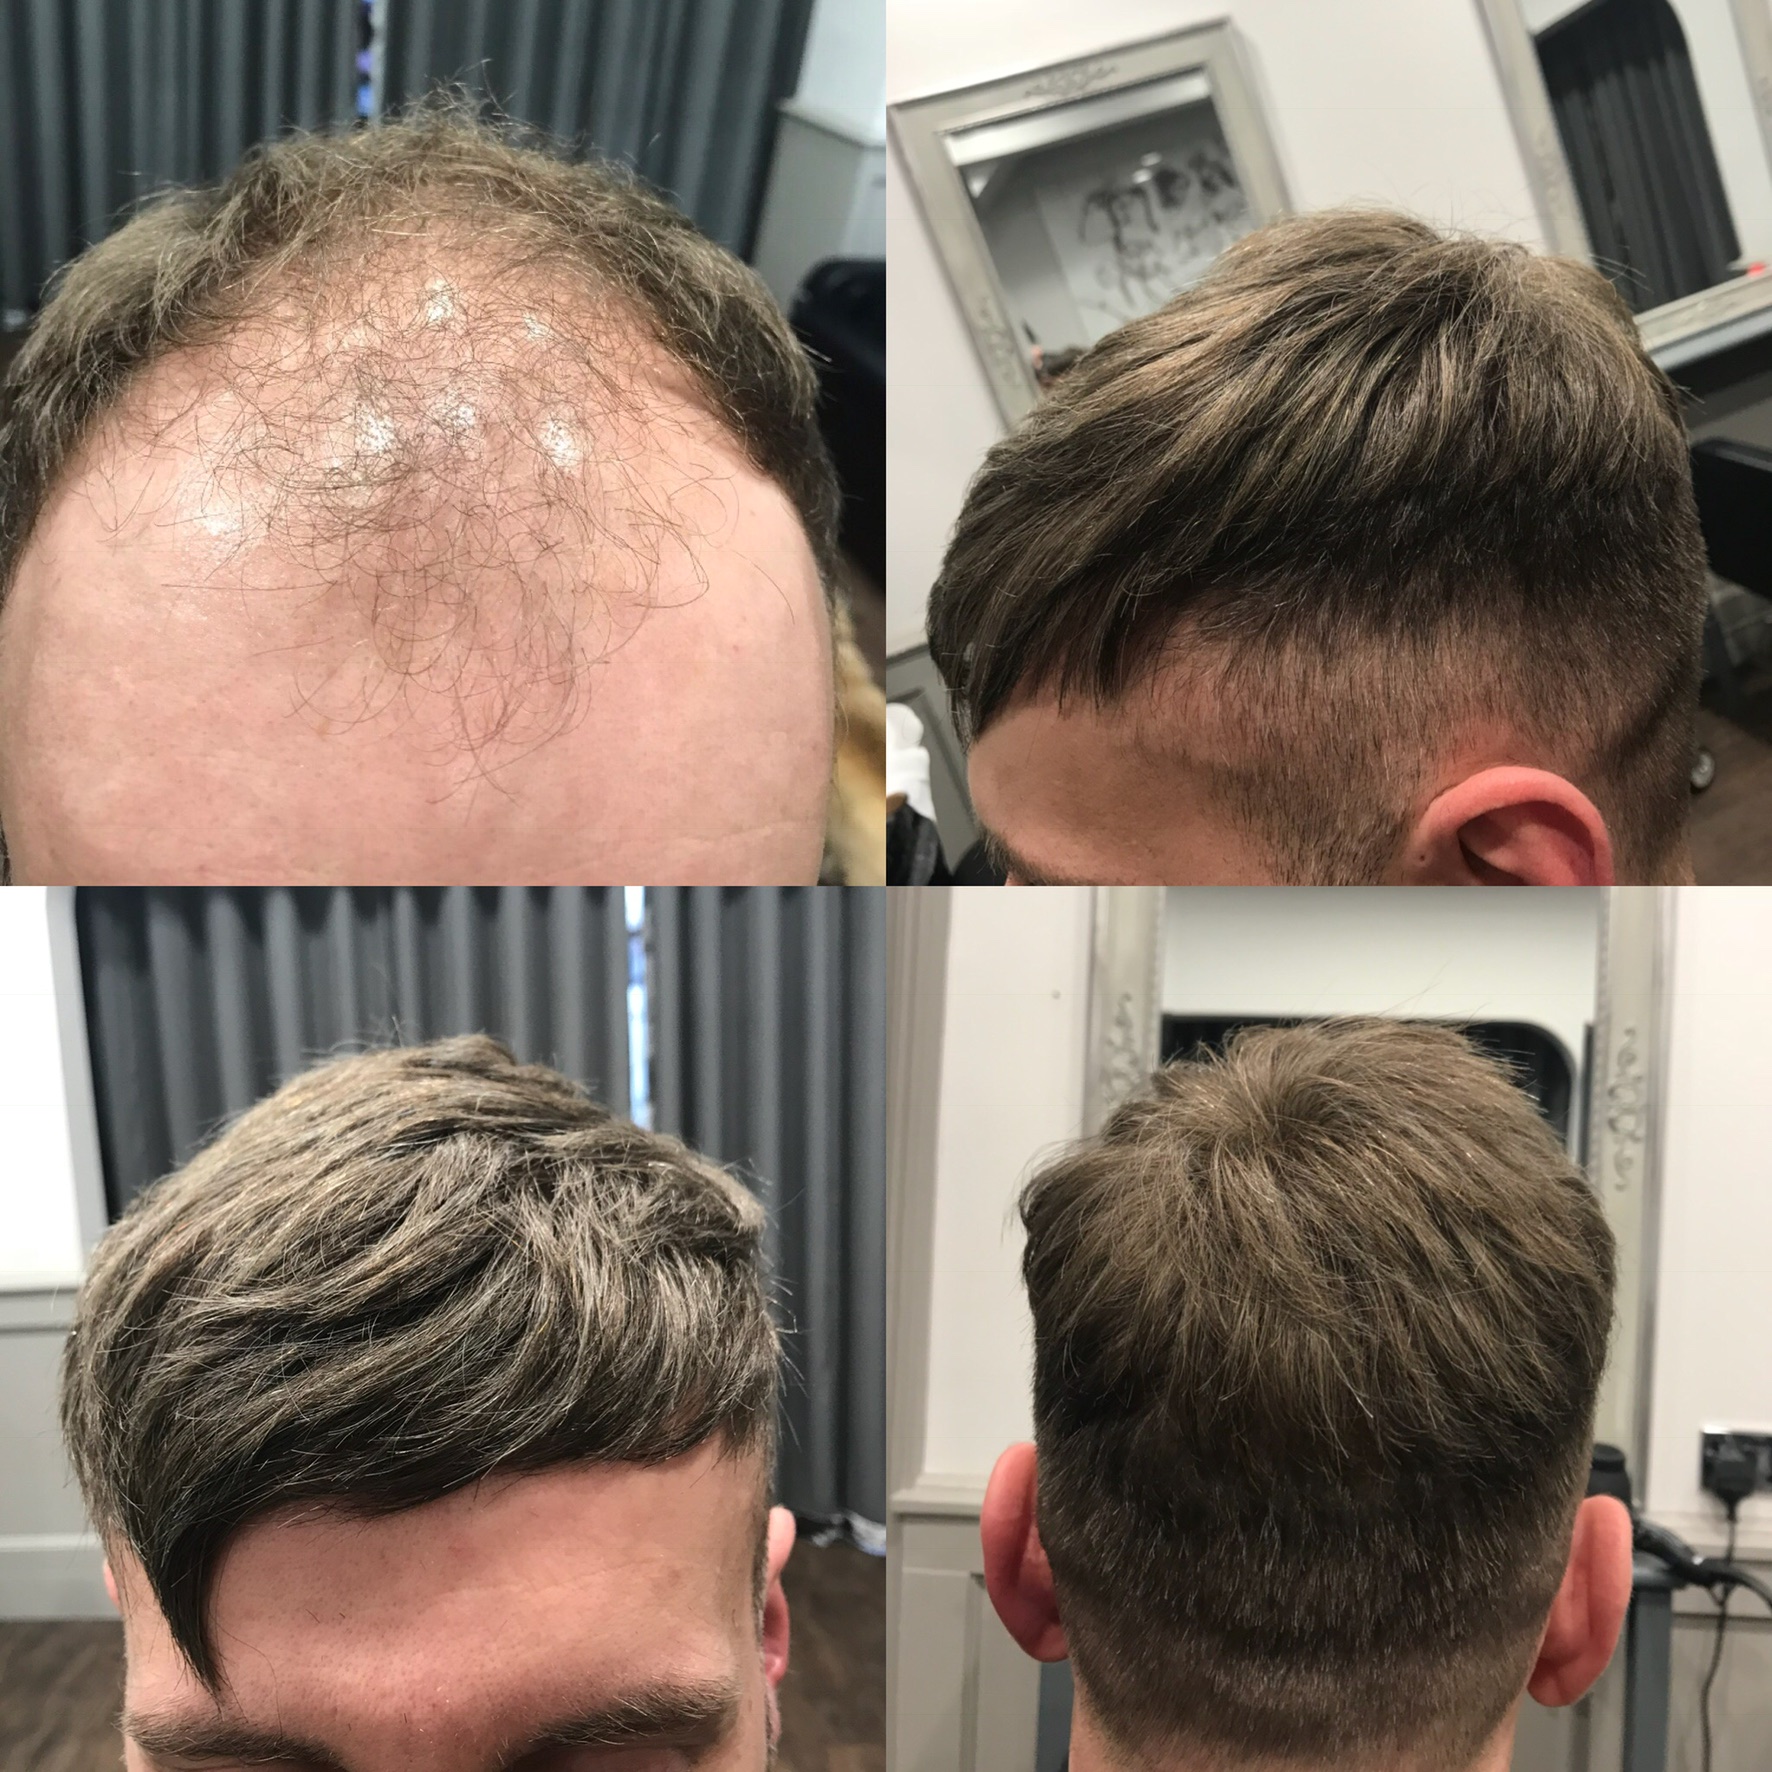 Hair replacement with brunette short hair on man